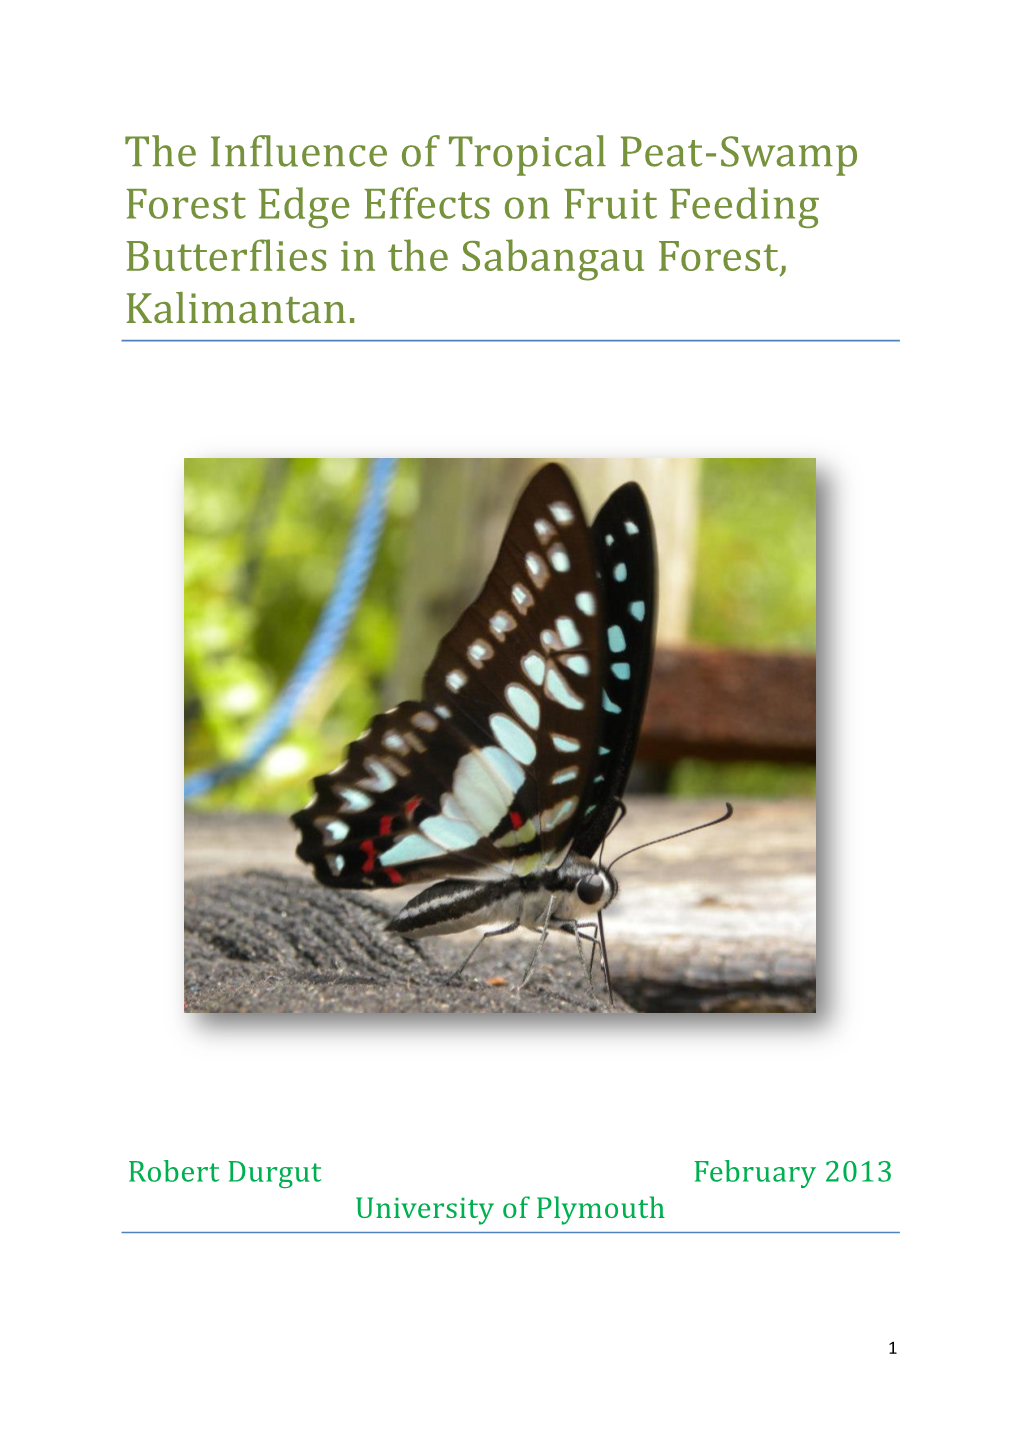 The Influence of Tropical Peat-Swamp Forest Edge Effects on Fruit Feeding Butterflies in the Sabangau Forest, Kalimantan